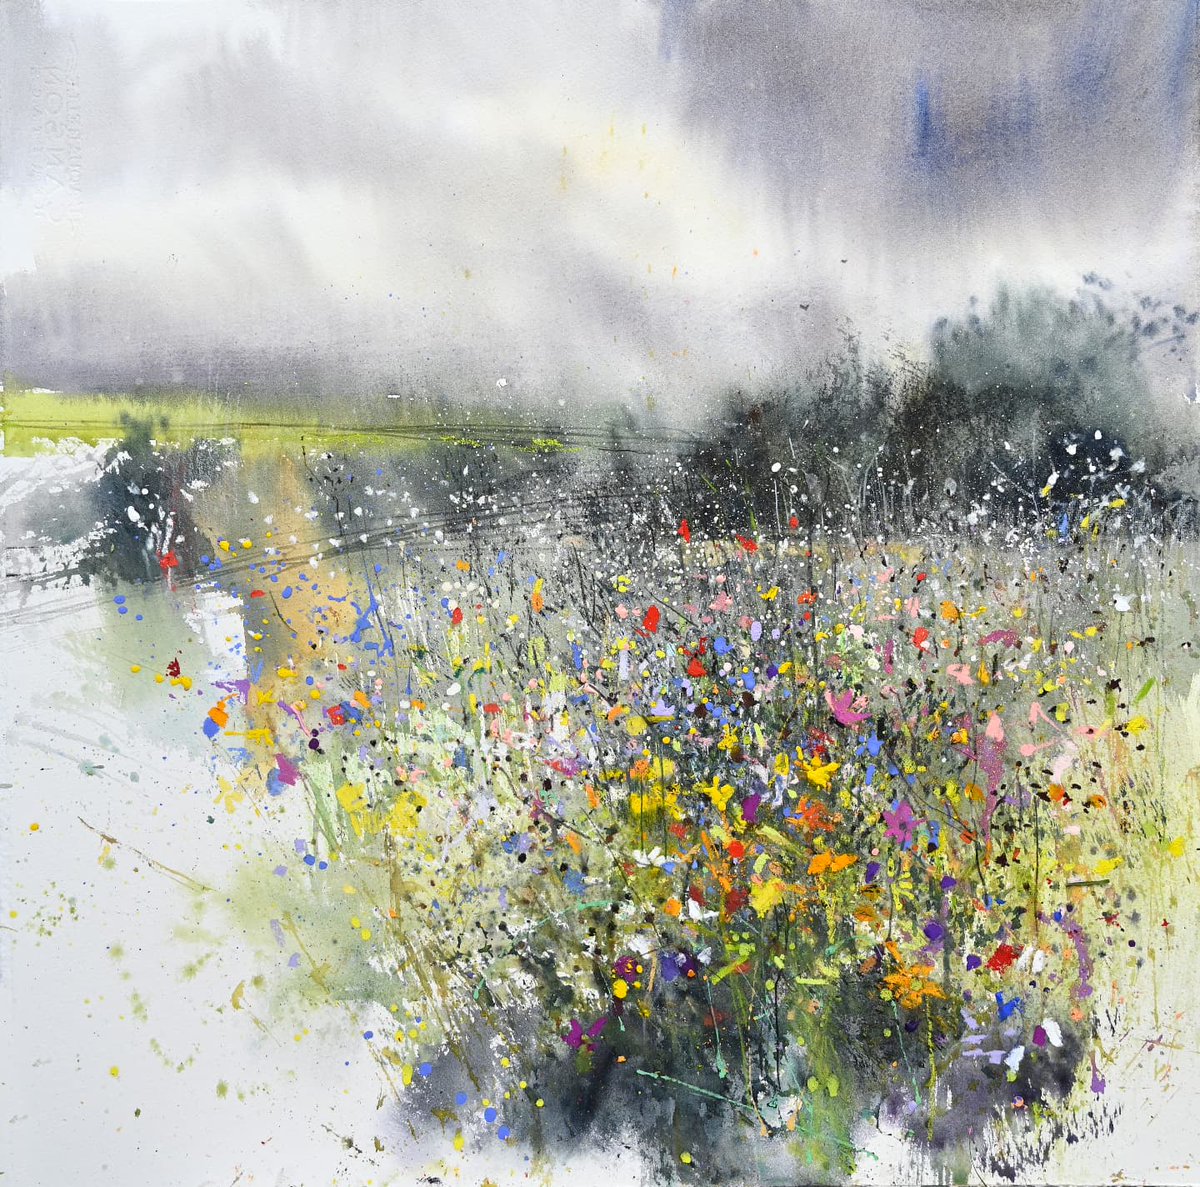 'Wild Meadow Flowers' 12.10.21
It's autum, yet those flowers in all their colourful glory are still blooming, heads turned towards the light to soak in the very last warm sunrays of the autumn sun. 

Mixed media 56x56cm
#enplainair #painting #meadowflowers